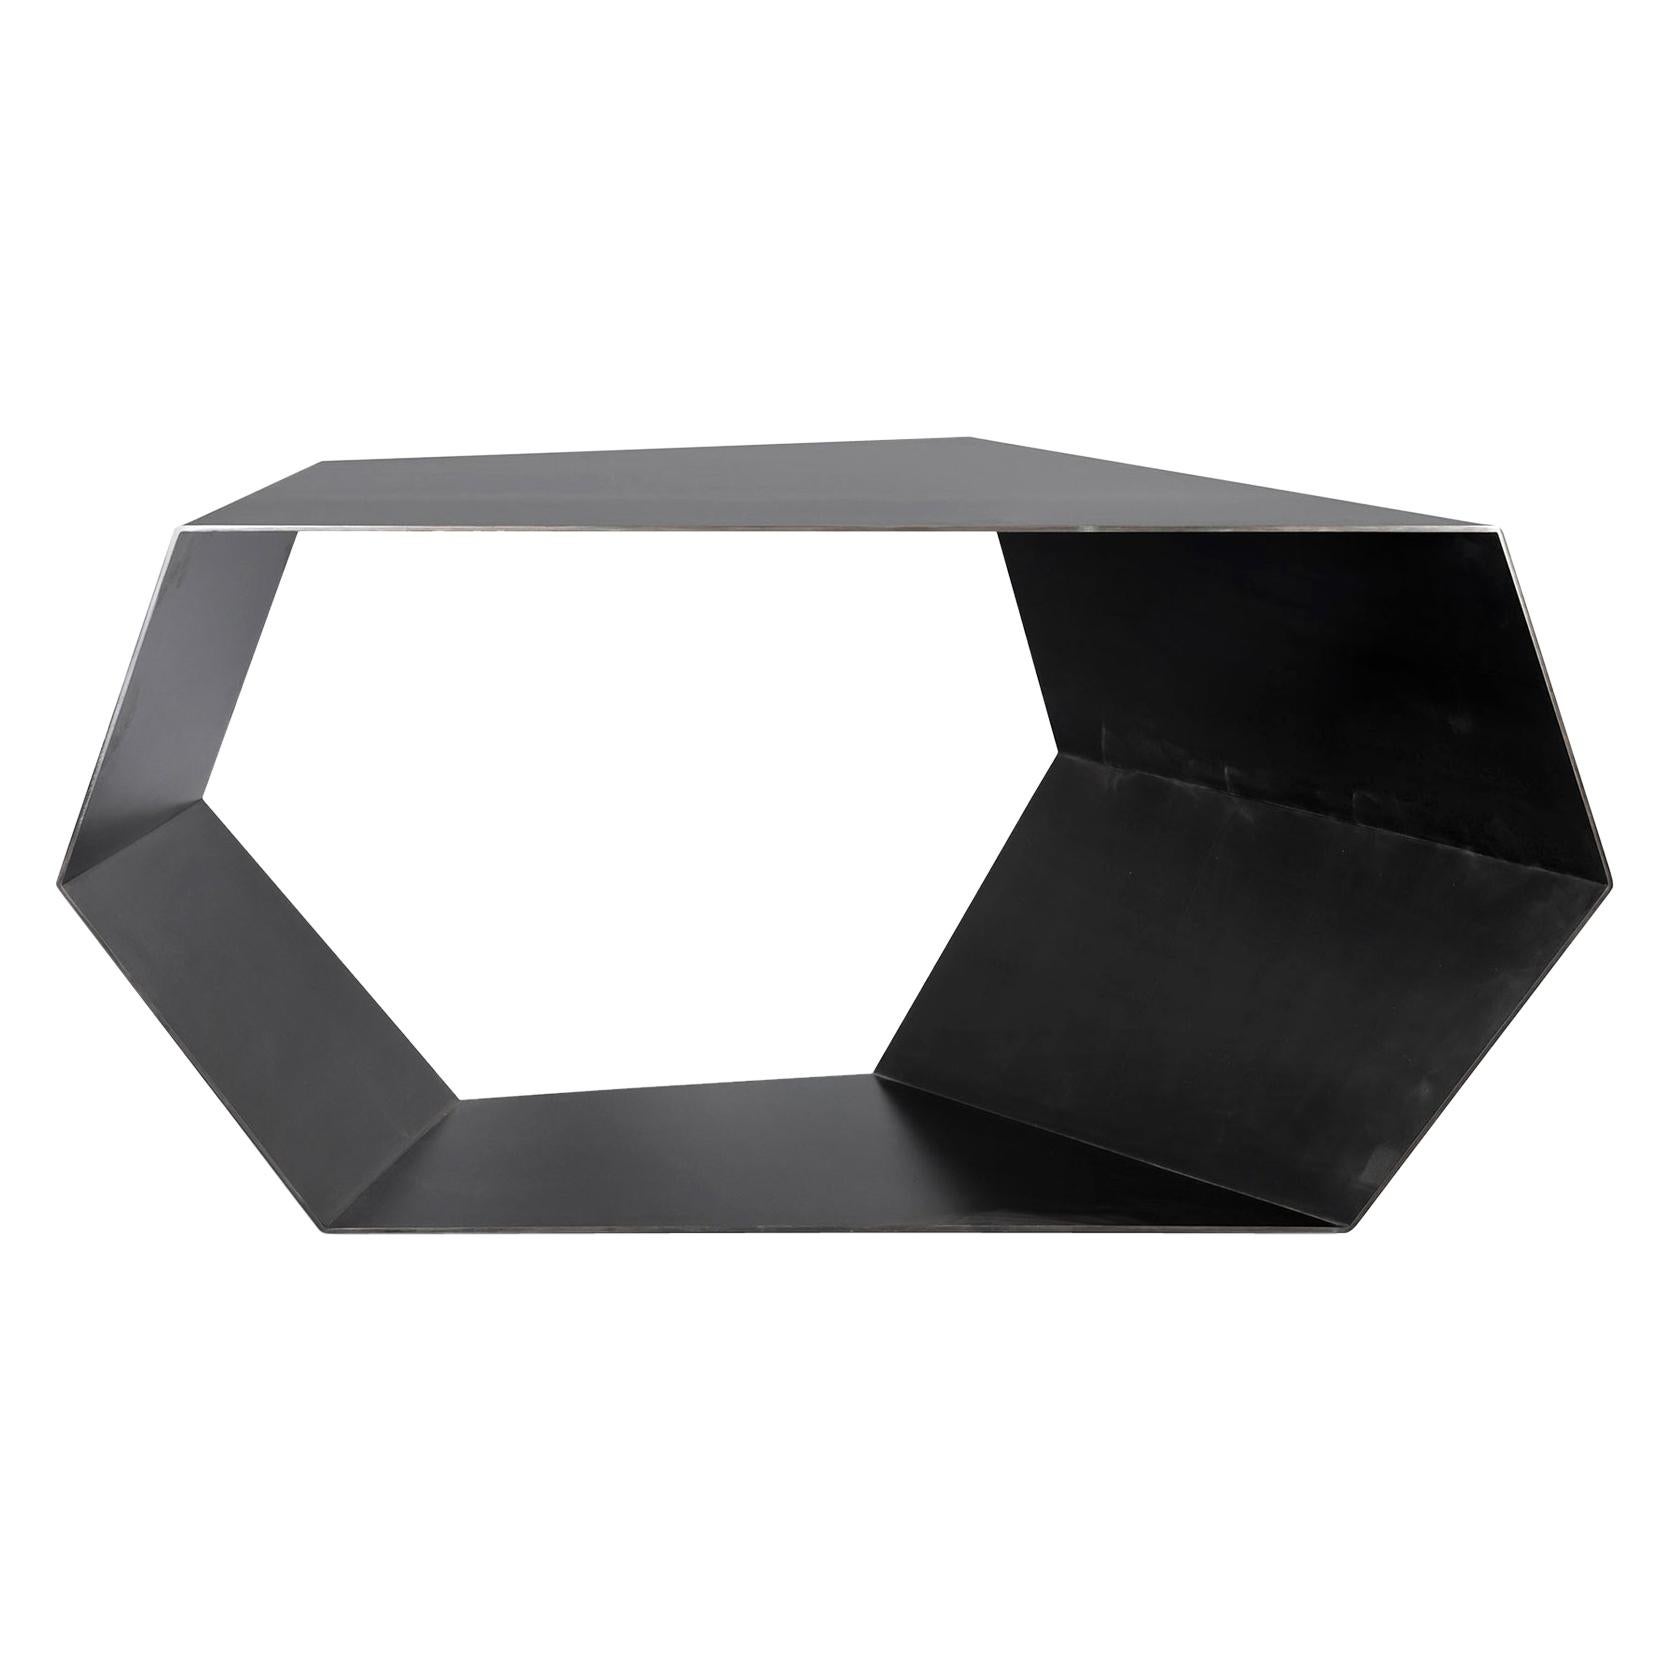 Open Geometric One Piece Steel Center Table with Contemporary Blackened Finish For Sale